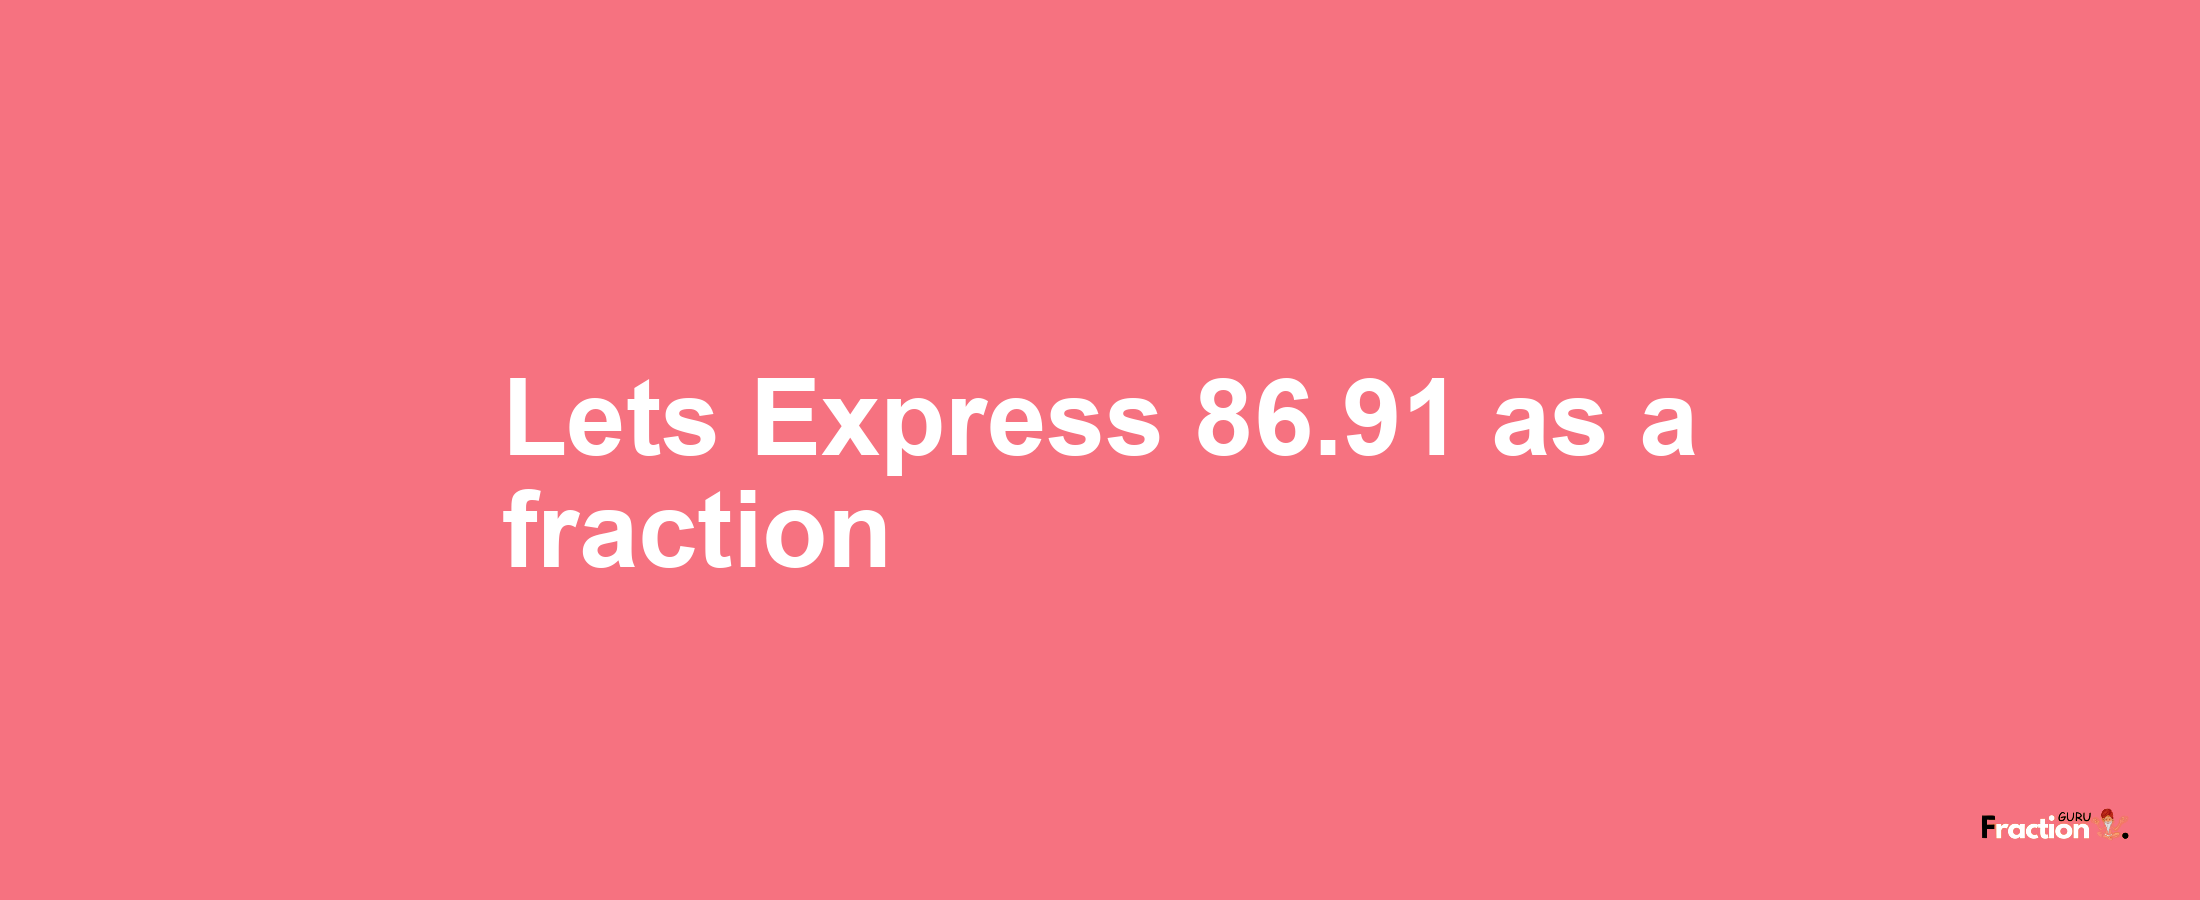 Lets Express 86.91 as afraction